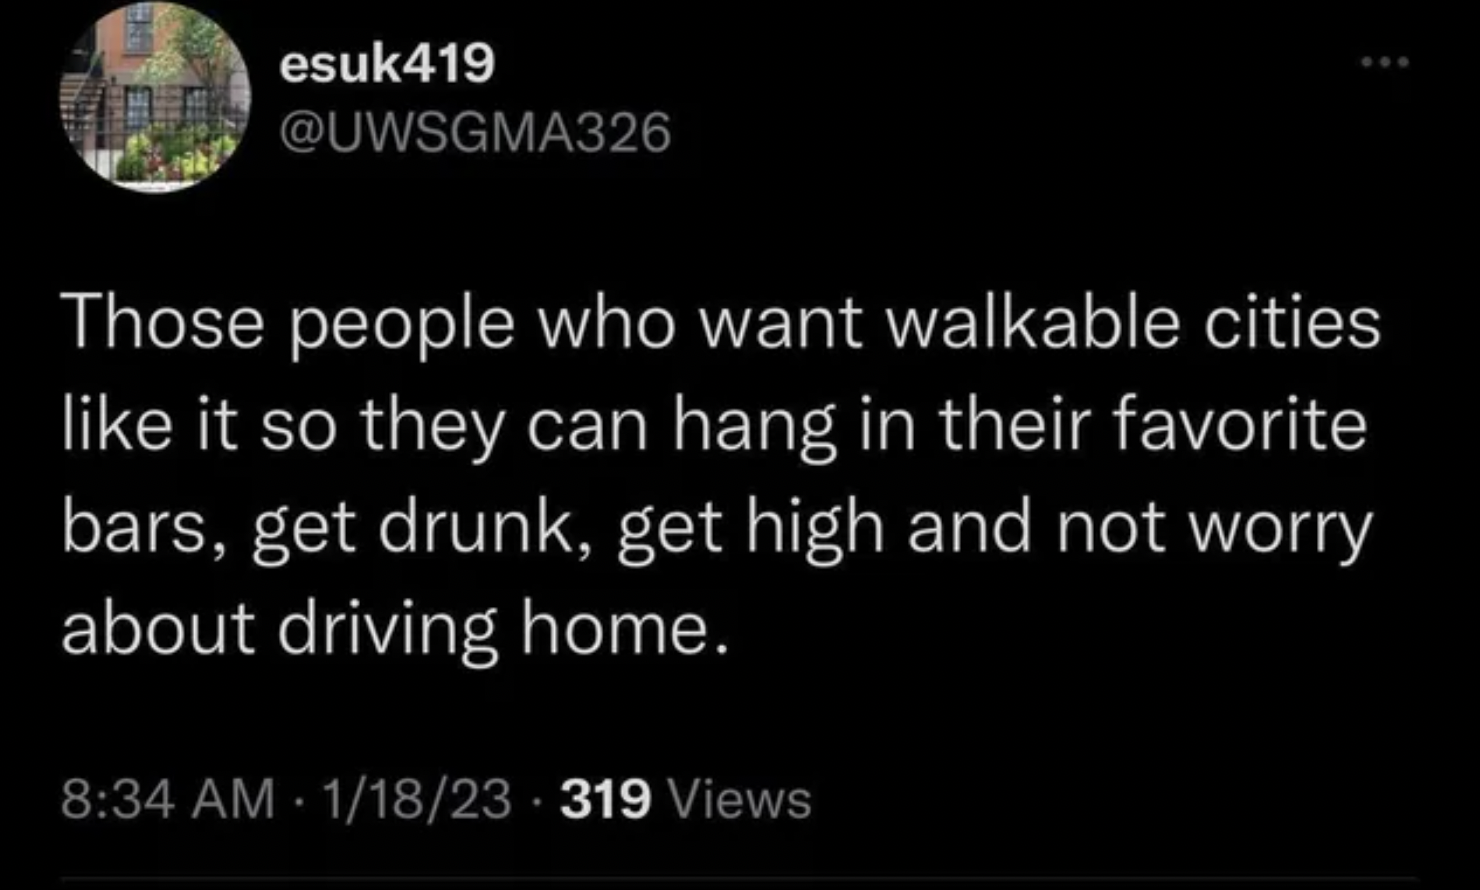 Those people who want walkable cities it so they can hang in their favorite bars, get drunk, get high and not worry about driving home.